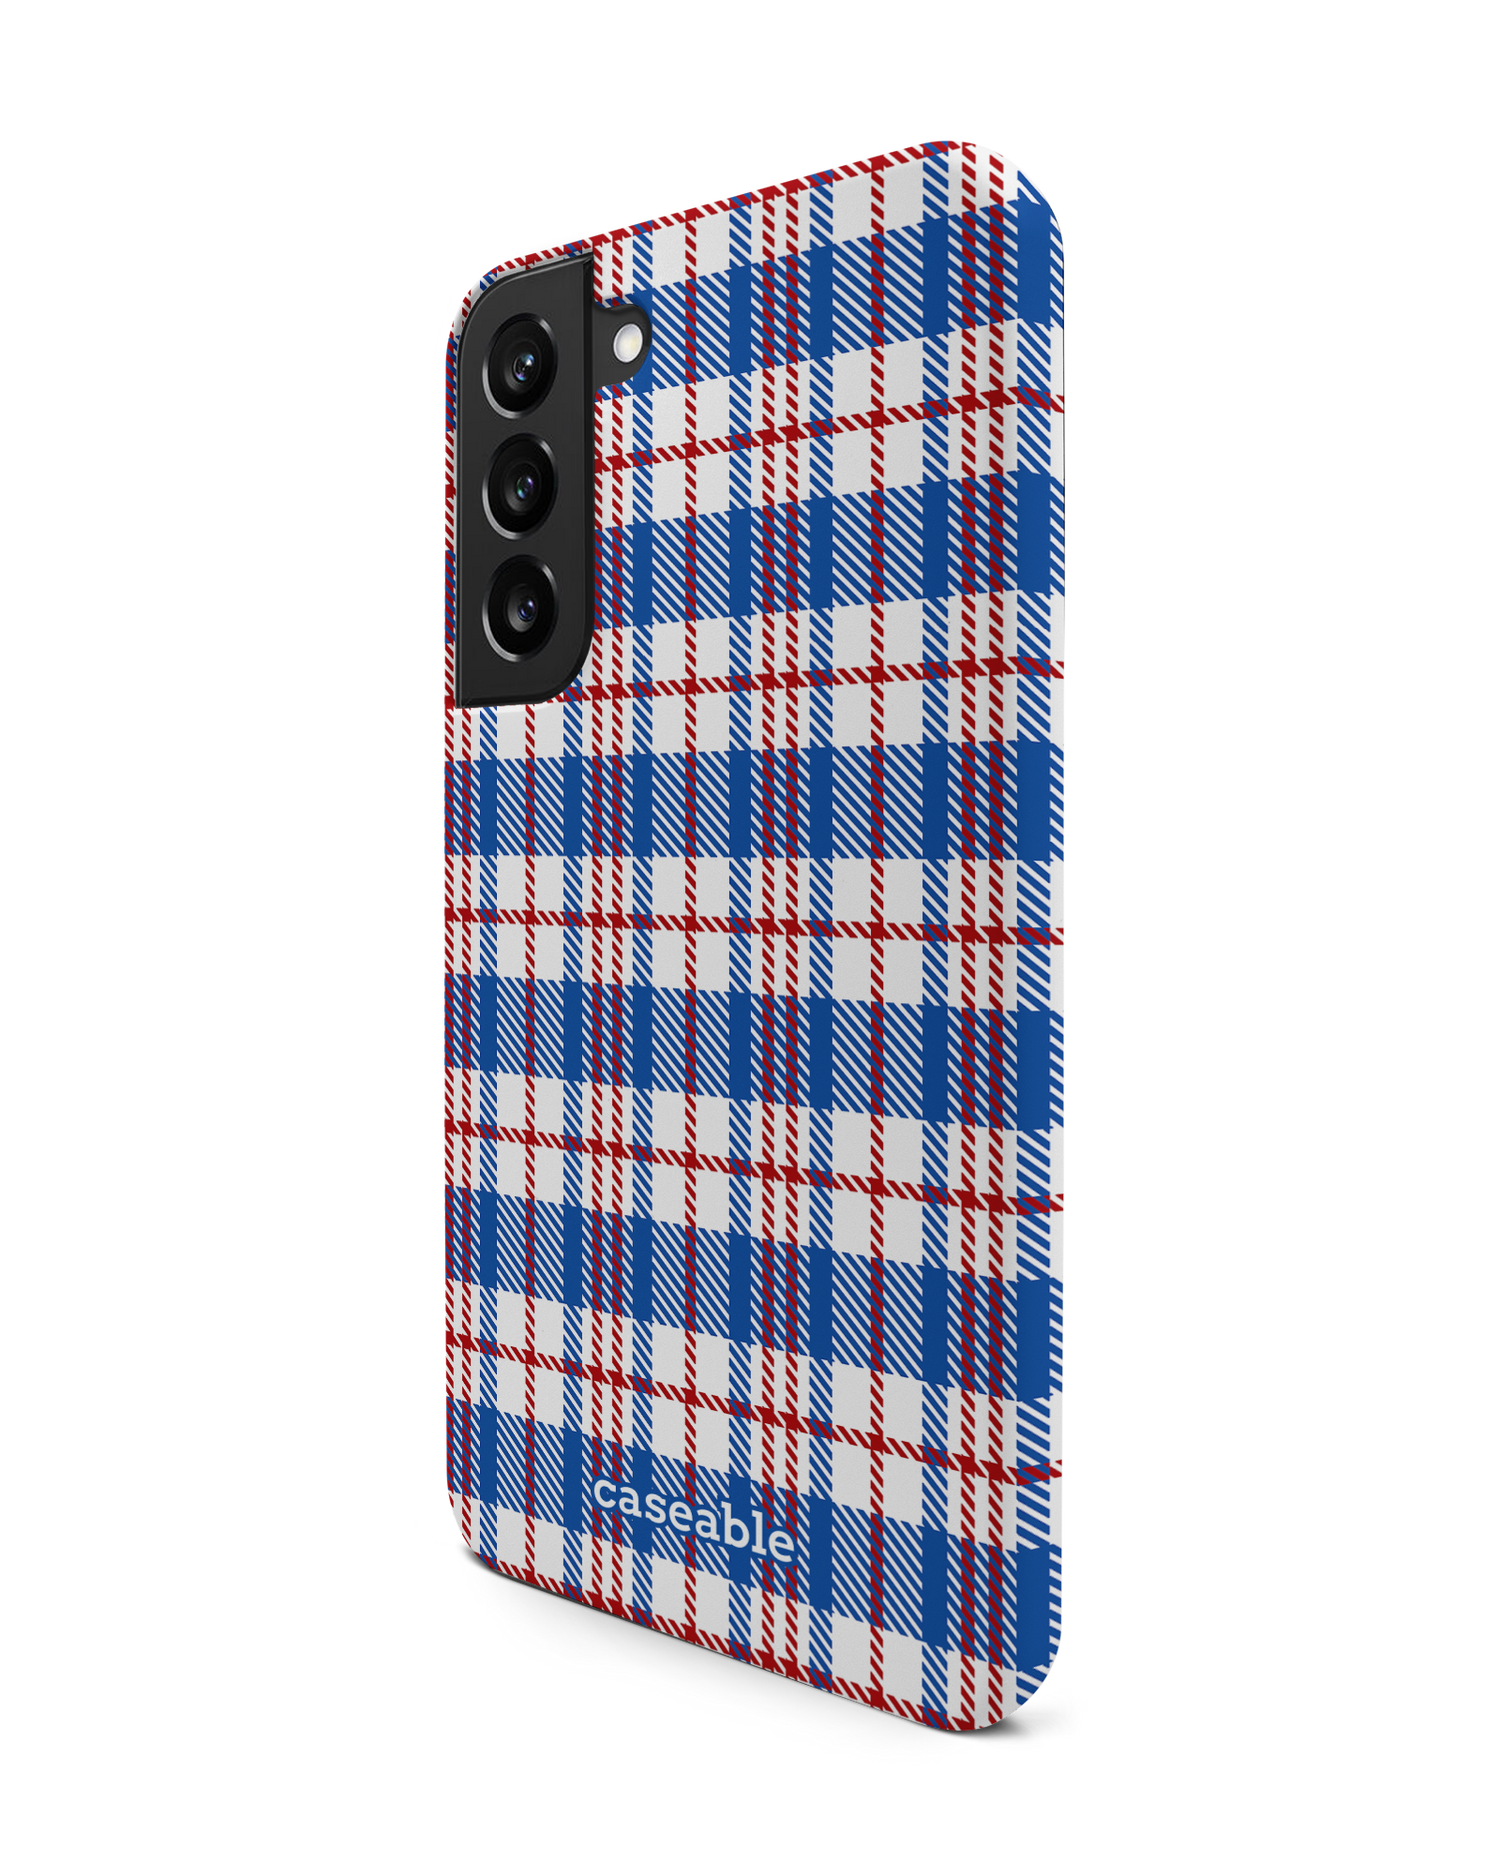 Plaid Market Bag Premium Phone Case Samsung Galaxy S22 Plus 5G: View from the right side